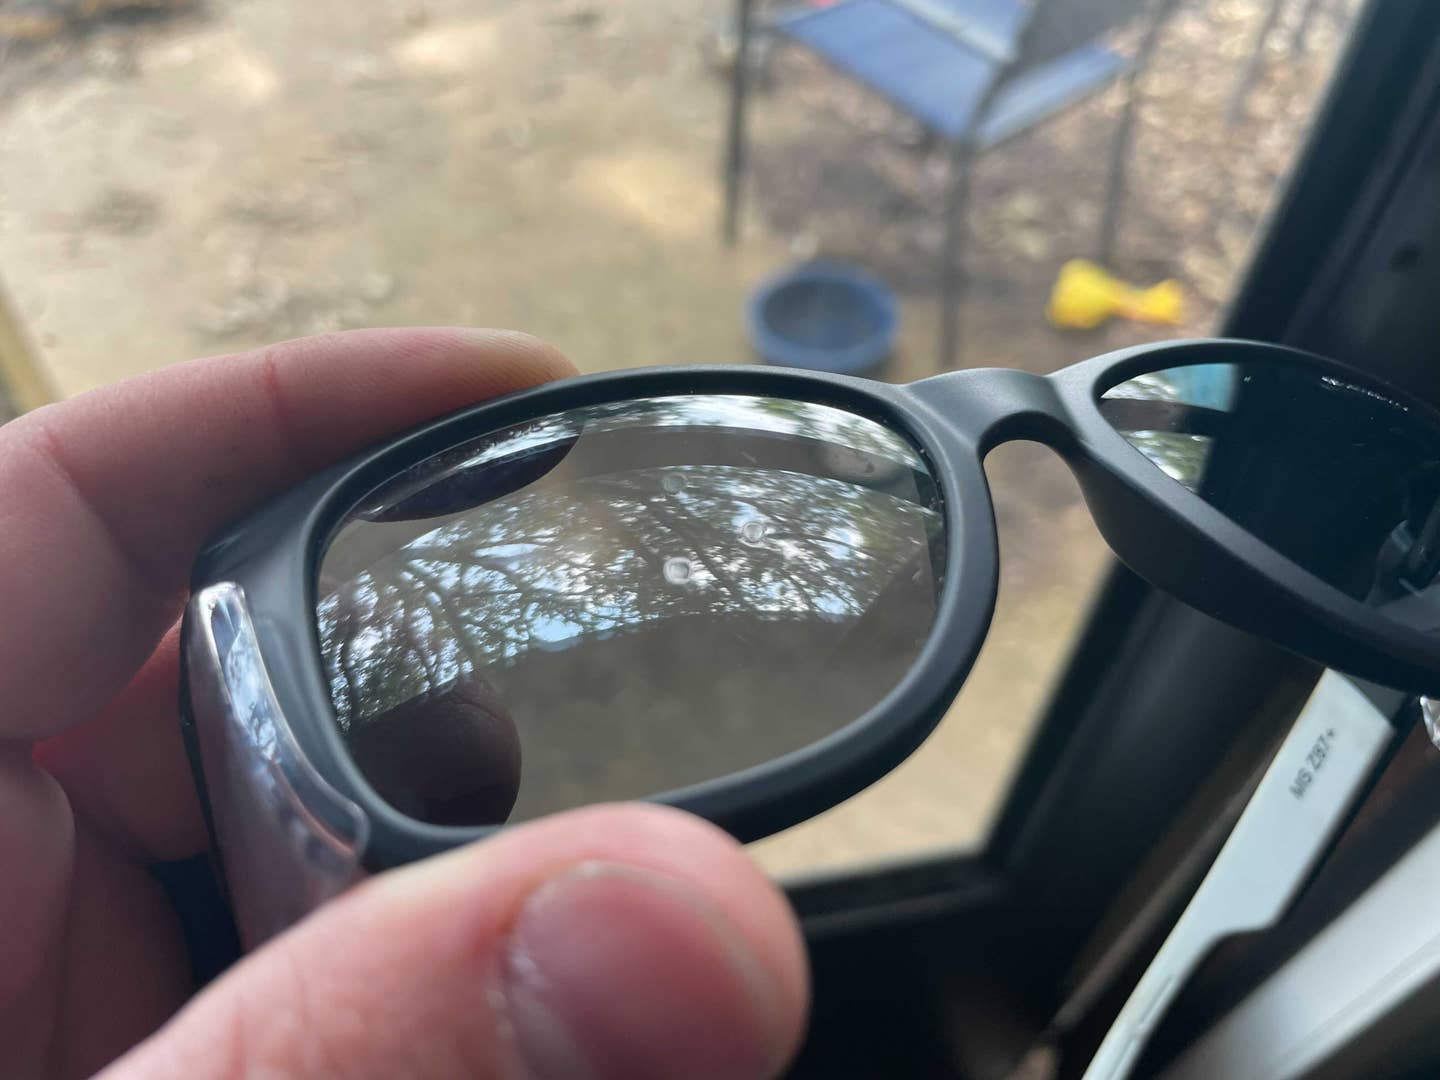 MAGID Safety Glasses after using